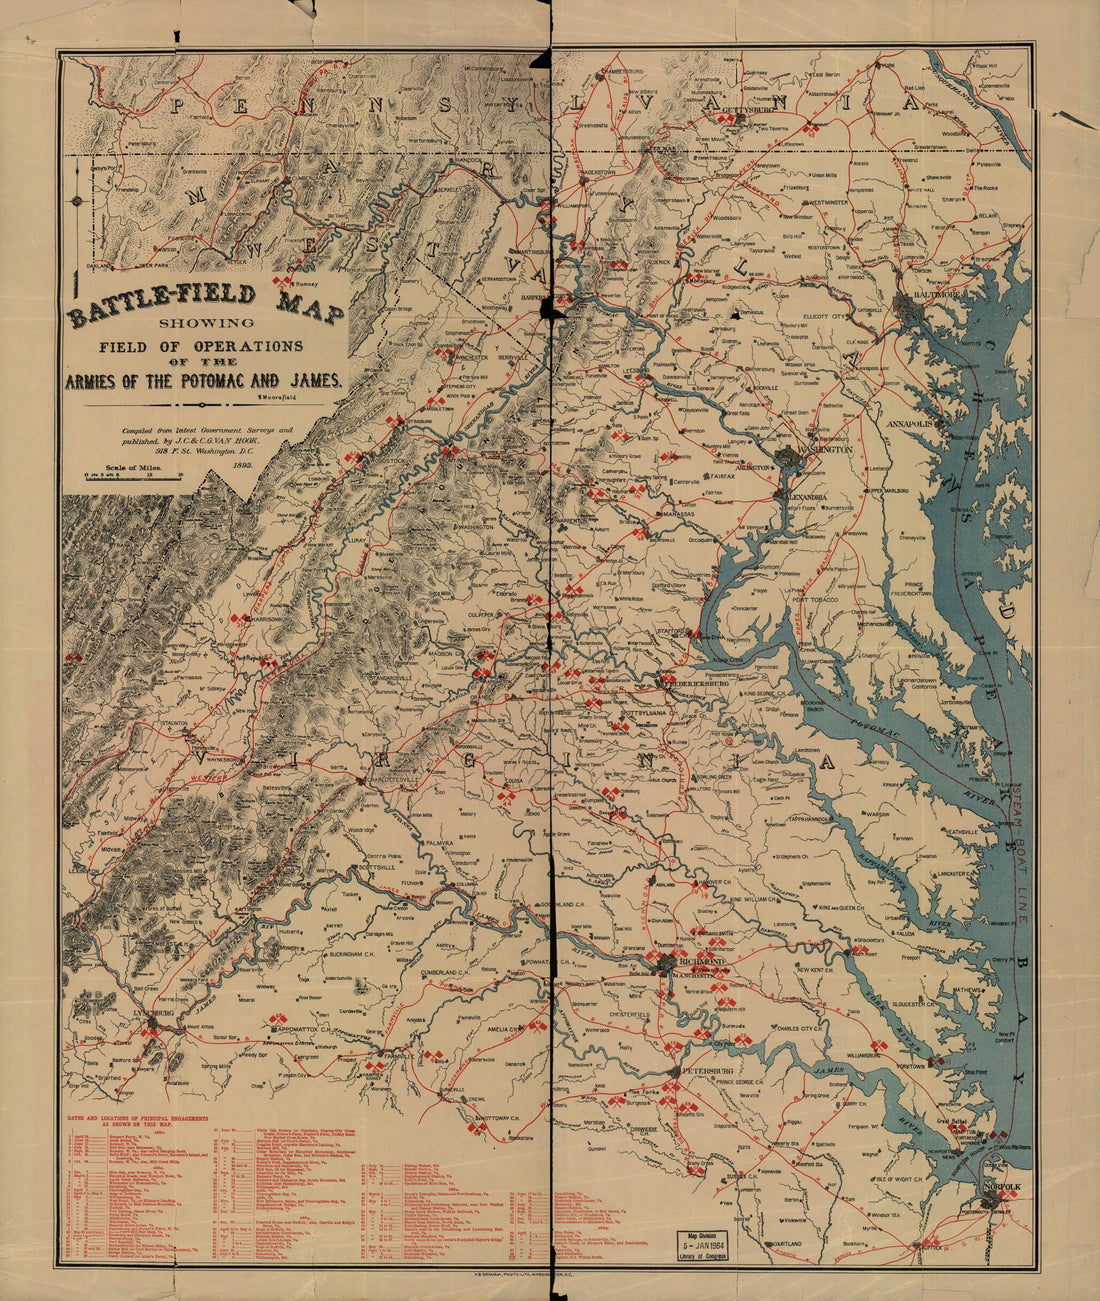 This old map of Field Map Showing Field of Operations of the Armies of the Potomac and James from 1892 was created by C. G. Van Hook, J. C. Van Hook in 1892